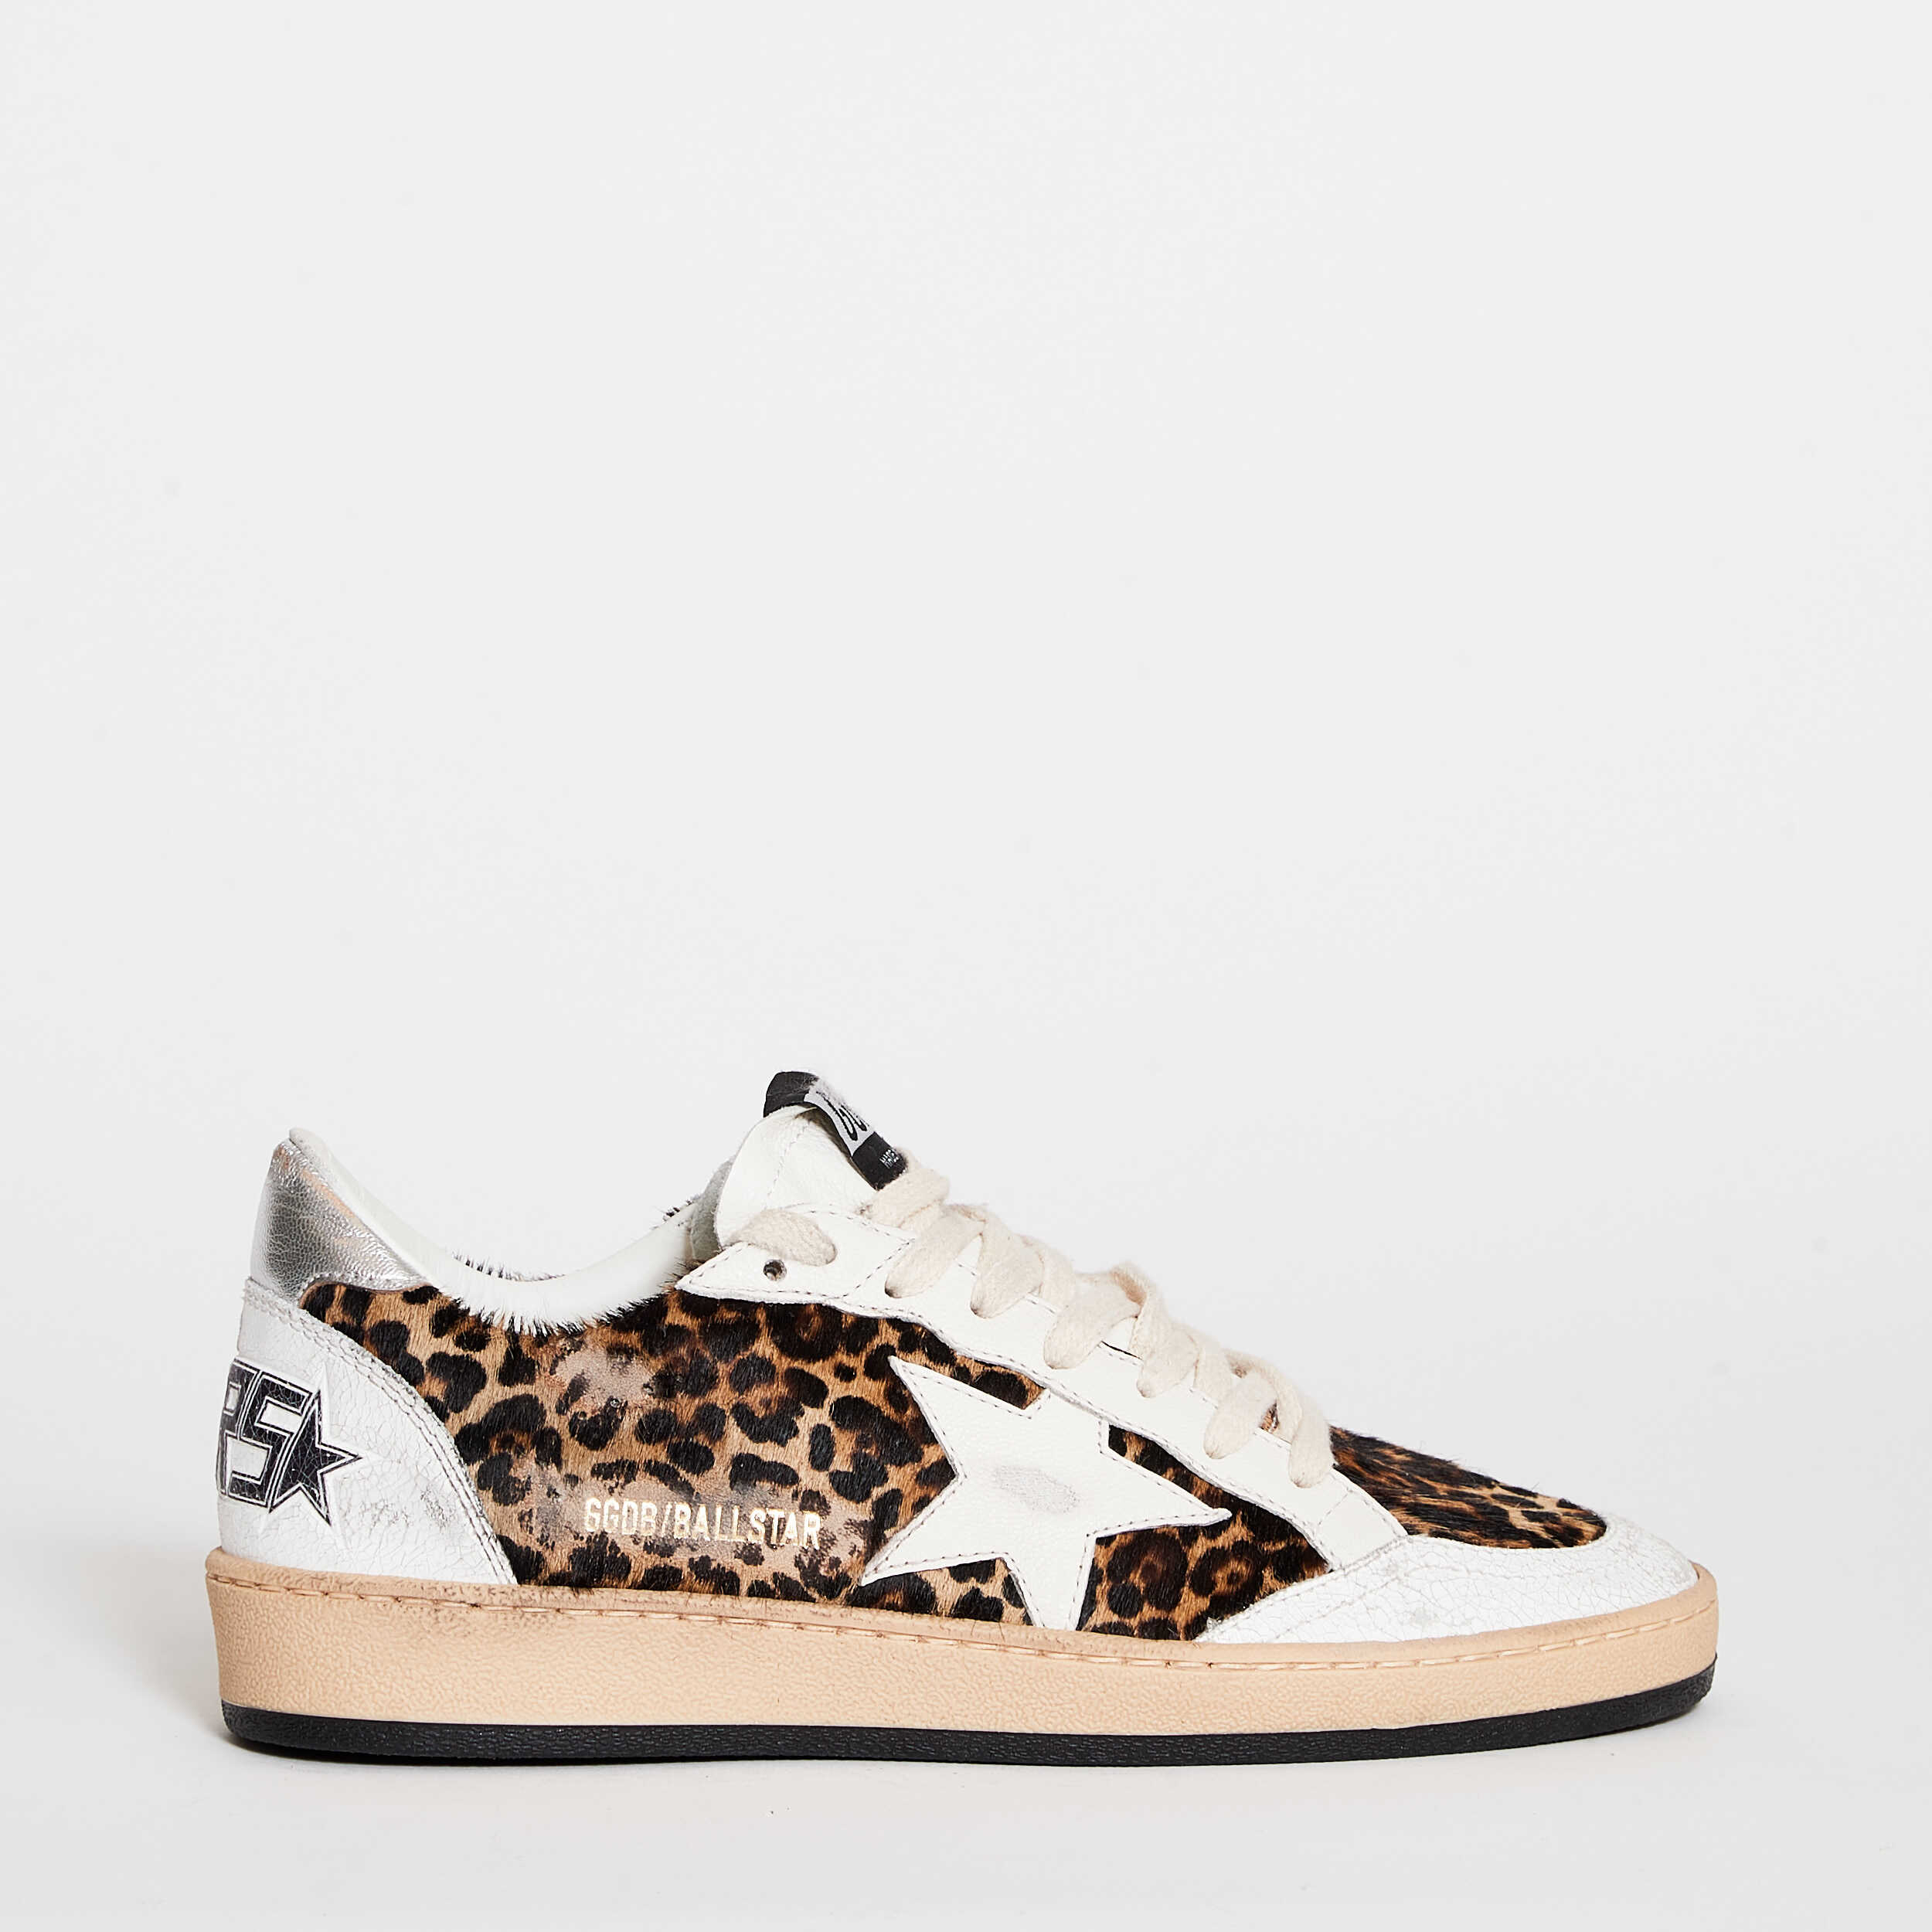 Golden Goose Sneakers BAll Star Leopard Brown White Natural